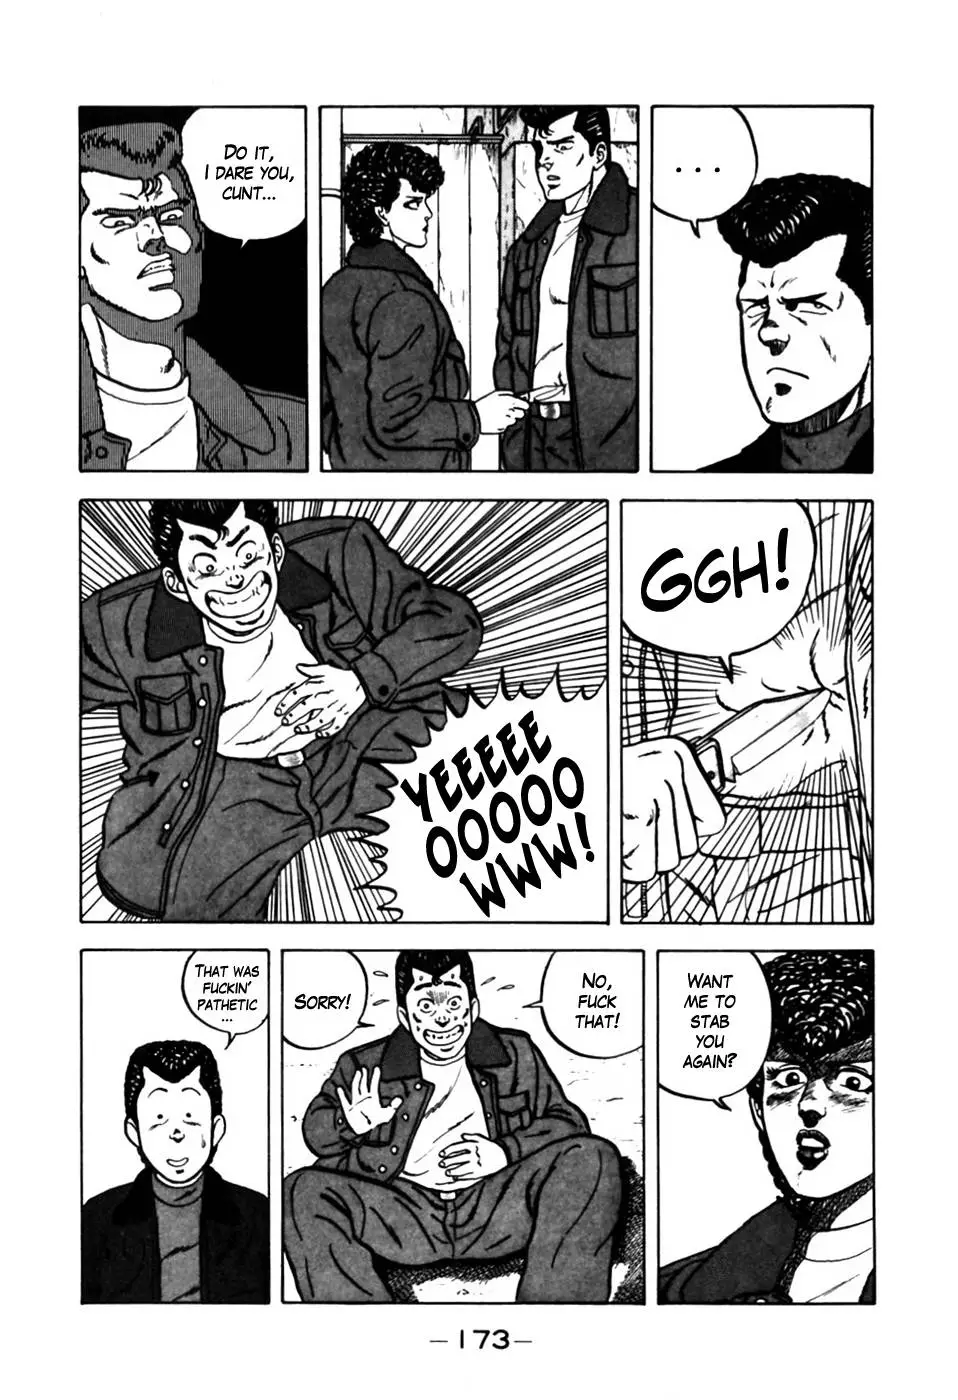 Be-Bop High School - 8 page p_00014